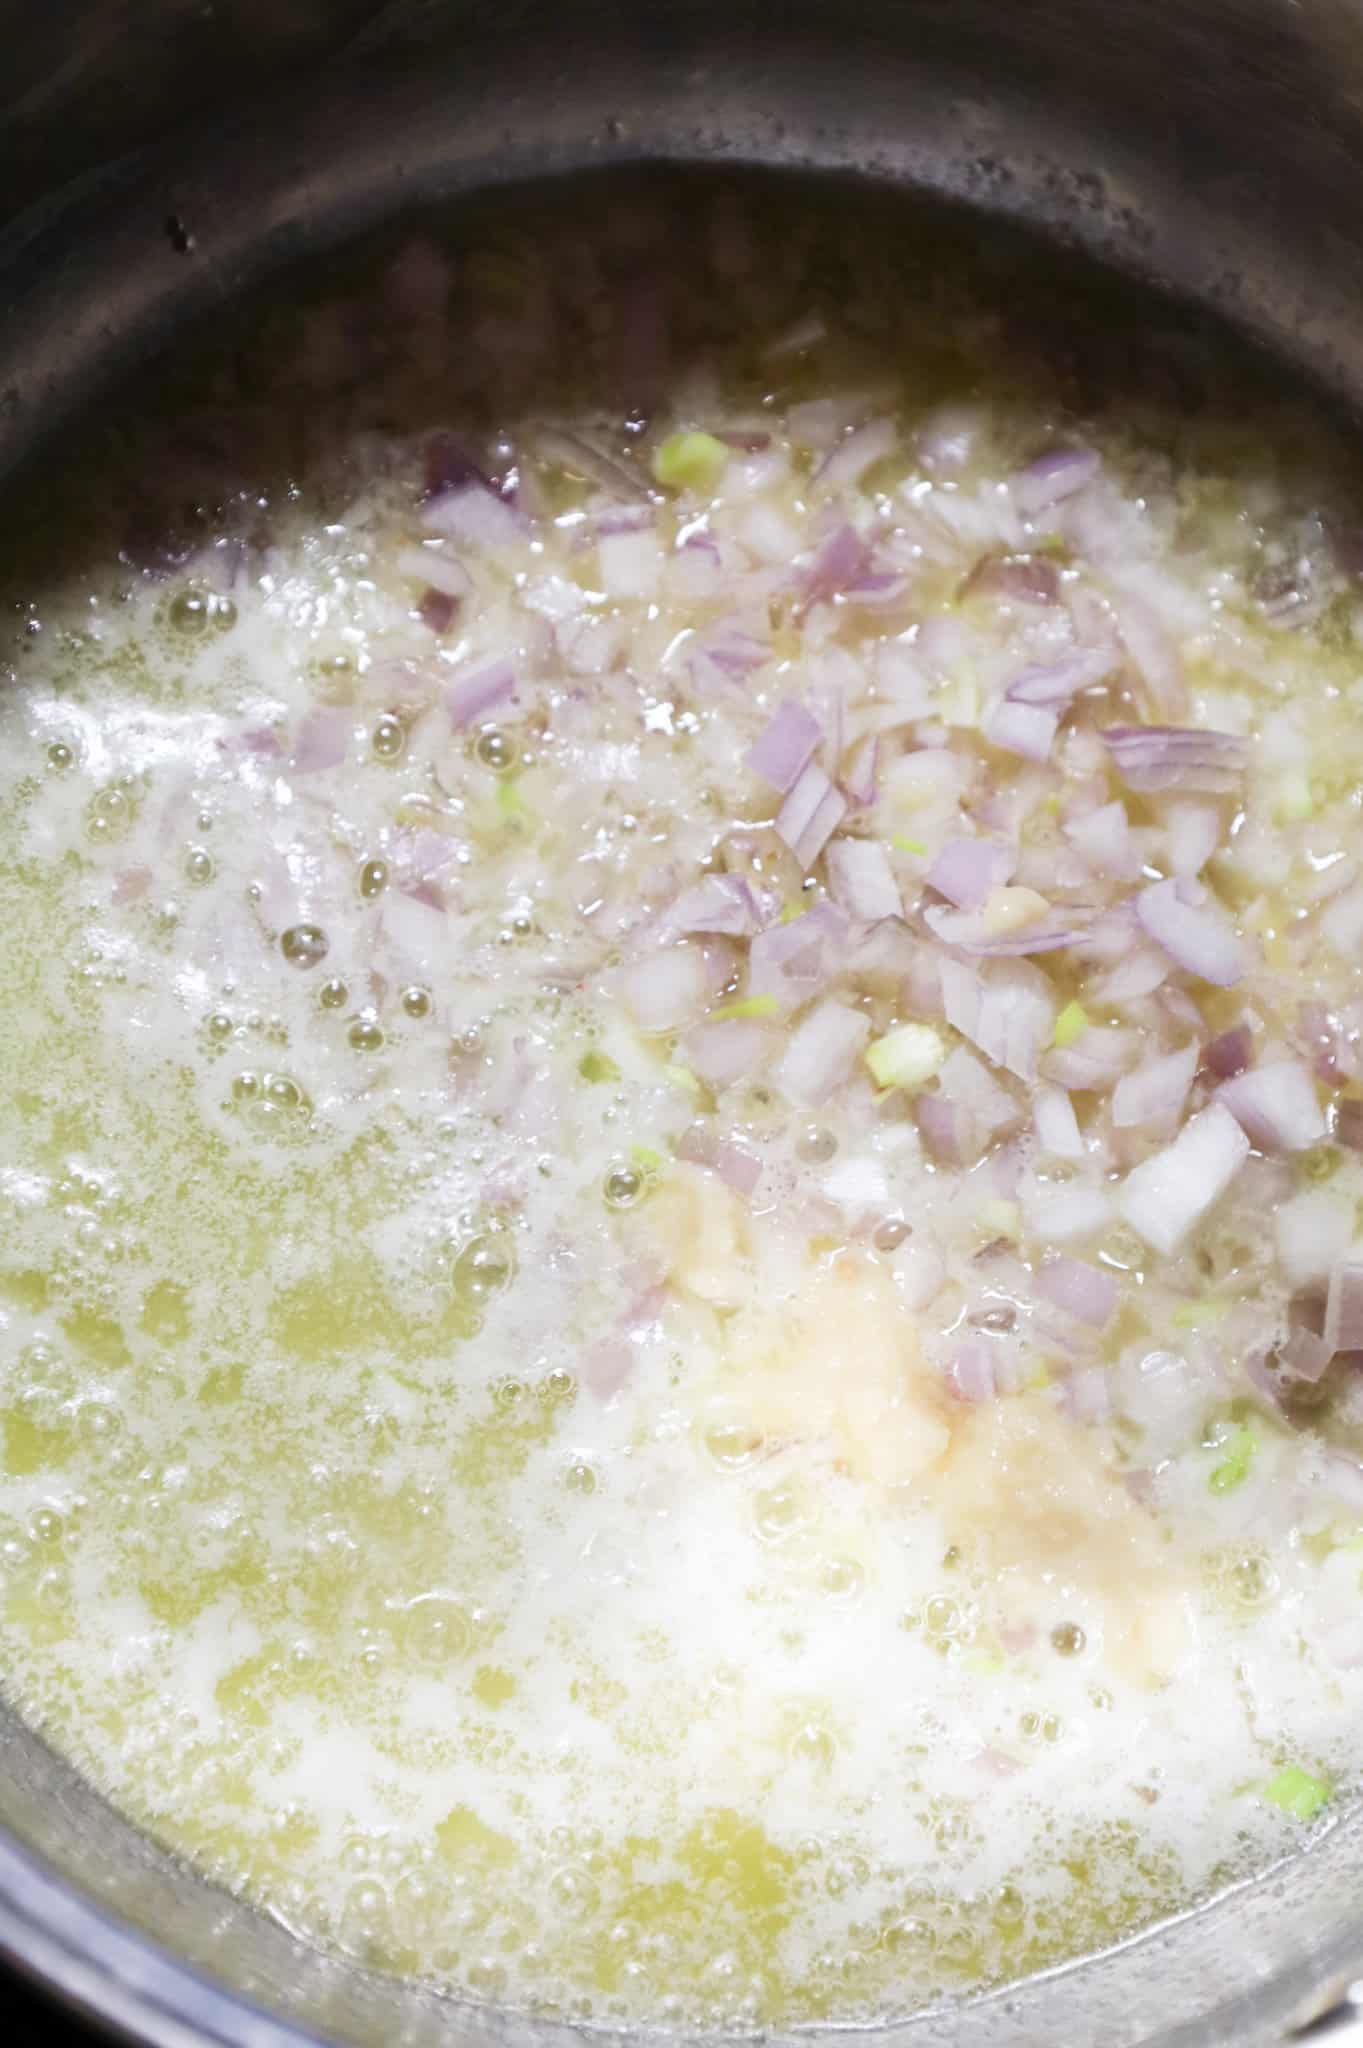 garlic puree, minced shallots and melted butter in a saucepan